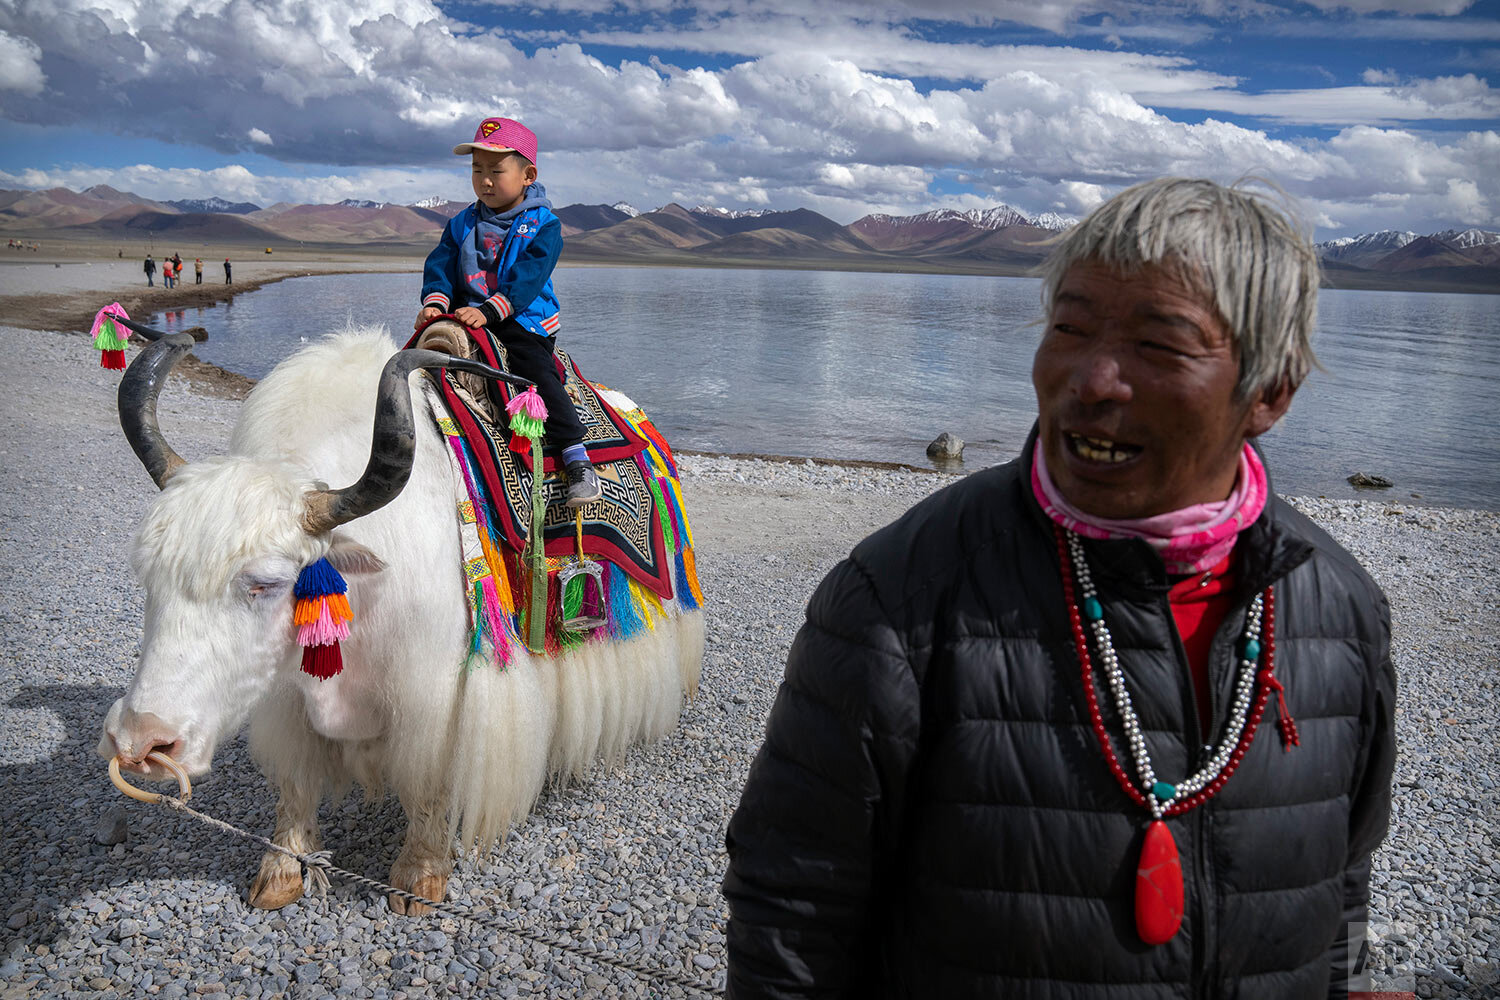  A Tibetan man stands nearby as a young tourist poses for photos on a white yak at the shore of the lake in Namtso in western China's Tibet Autonomous Region, as seen during a government organized visit for foreign journalists, Wednesday, June 2, 202